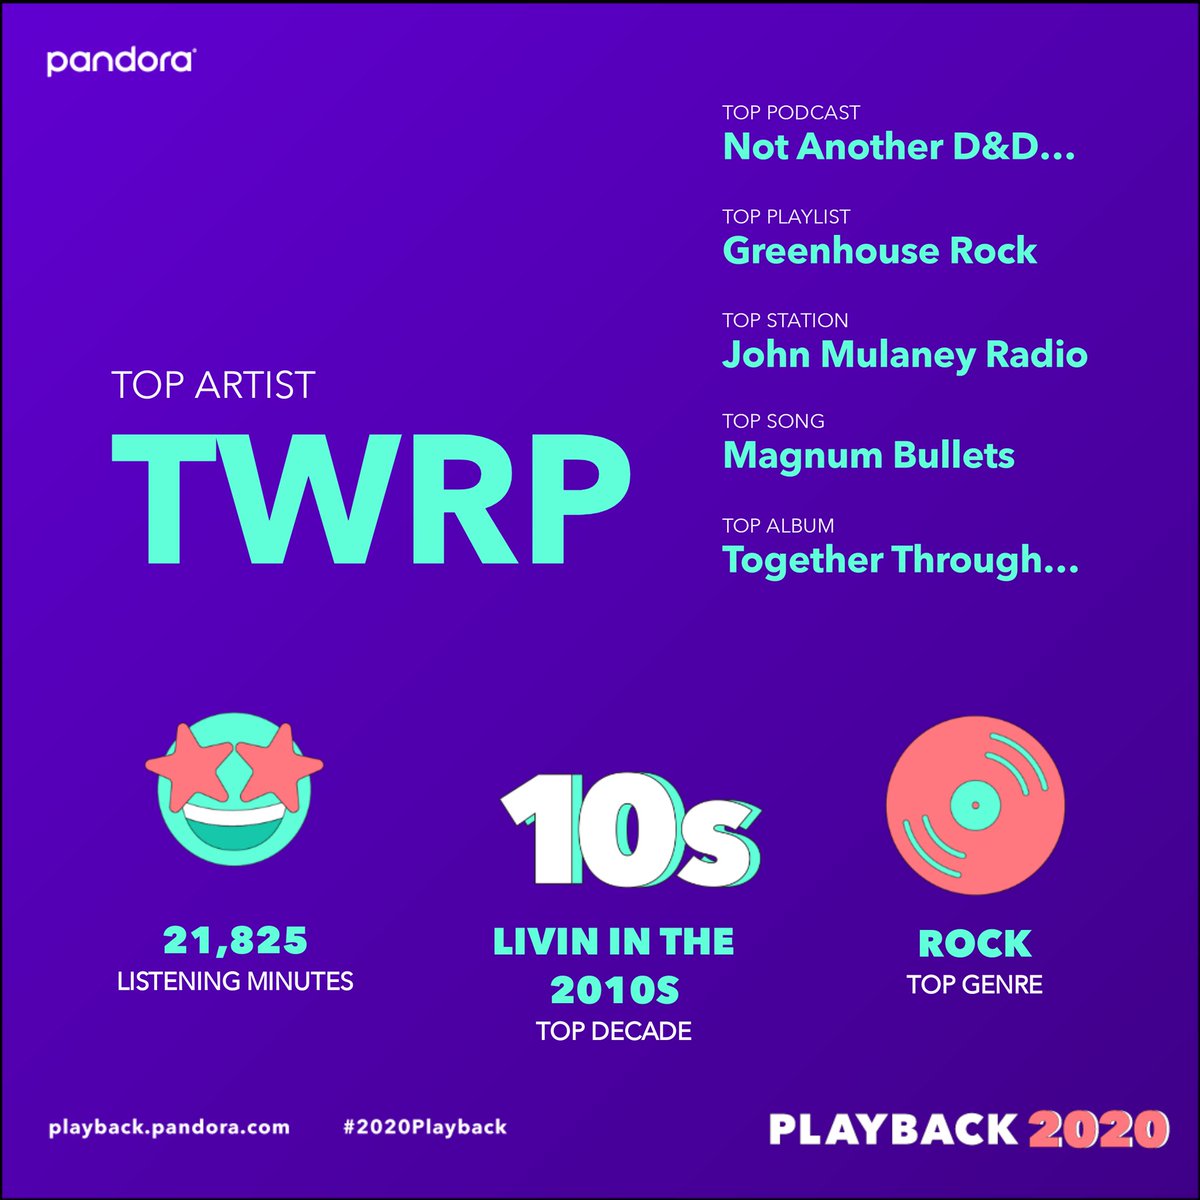 Thank you @TWRPband #PandoraPlayback has clearly stated you got me through 2020. I cant wait for what you guys do next.